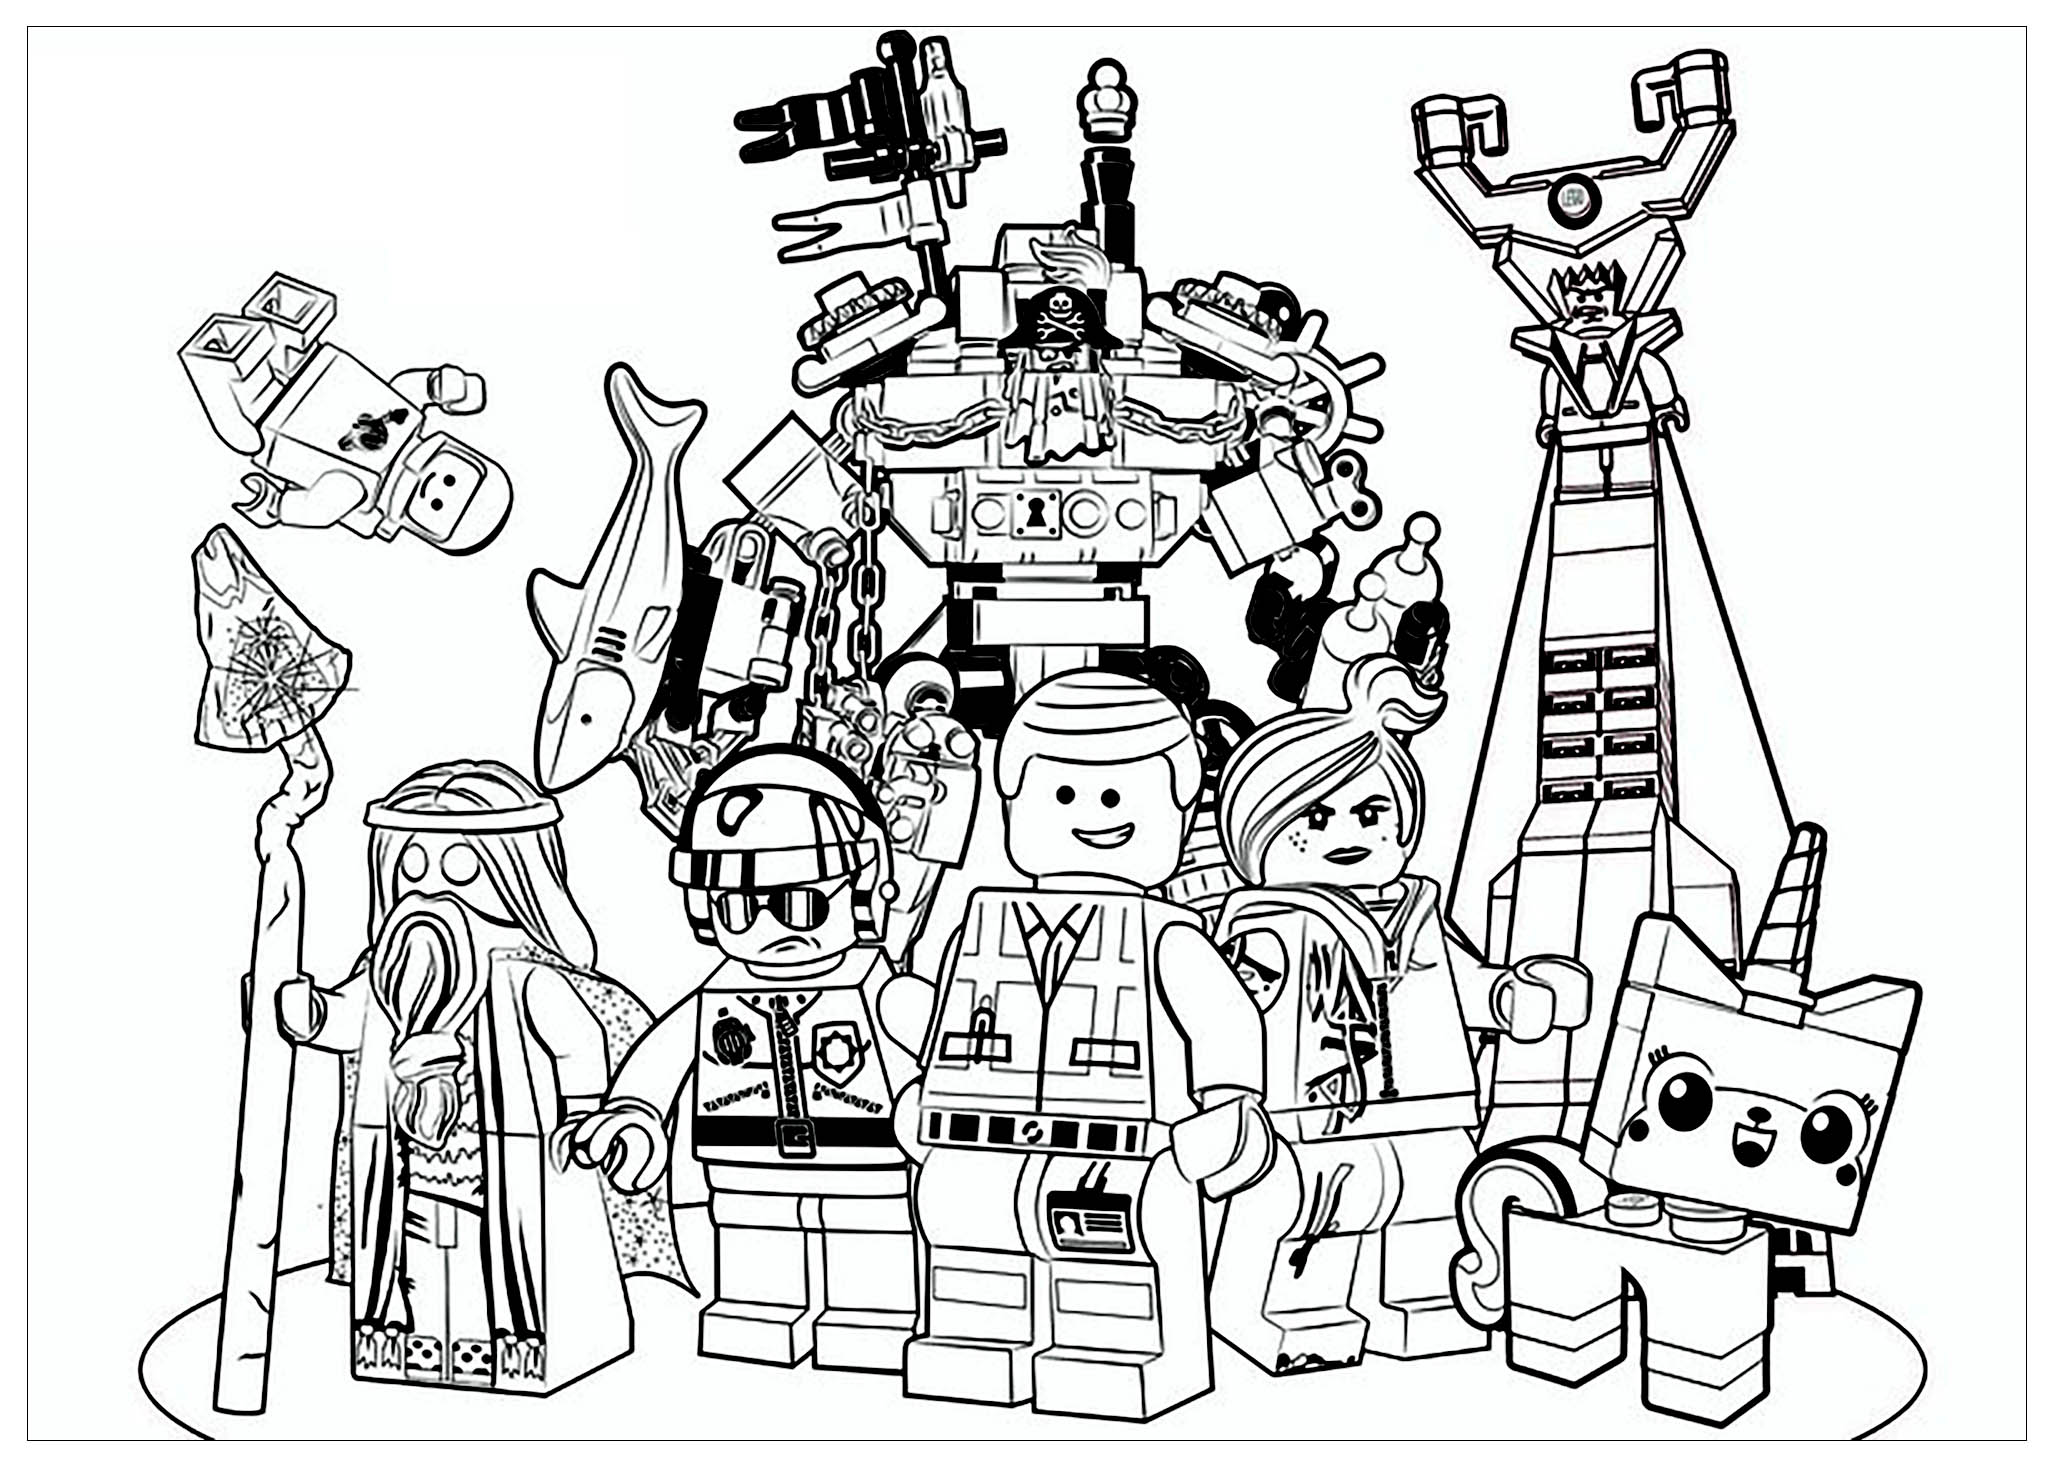 Lego movie coloring page Permission For personal and non mercial use only